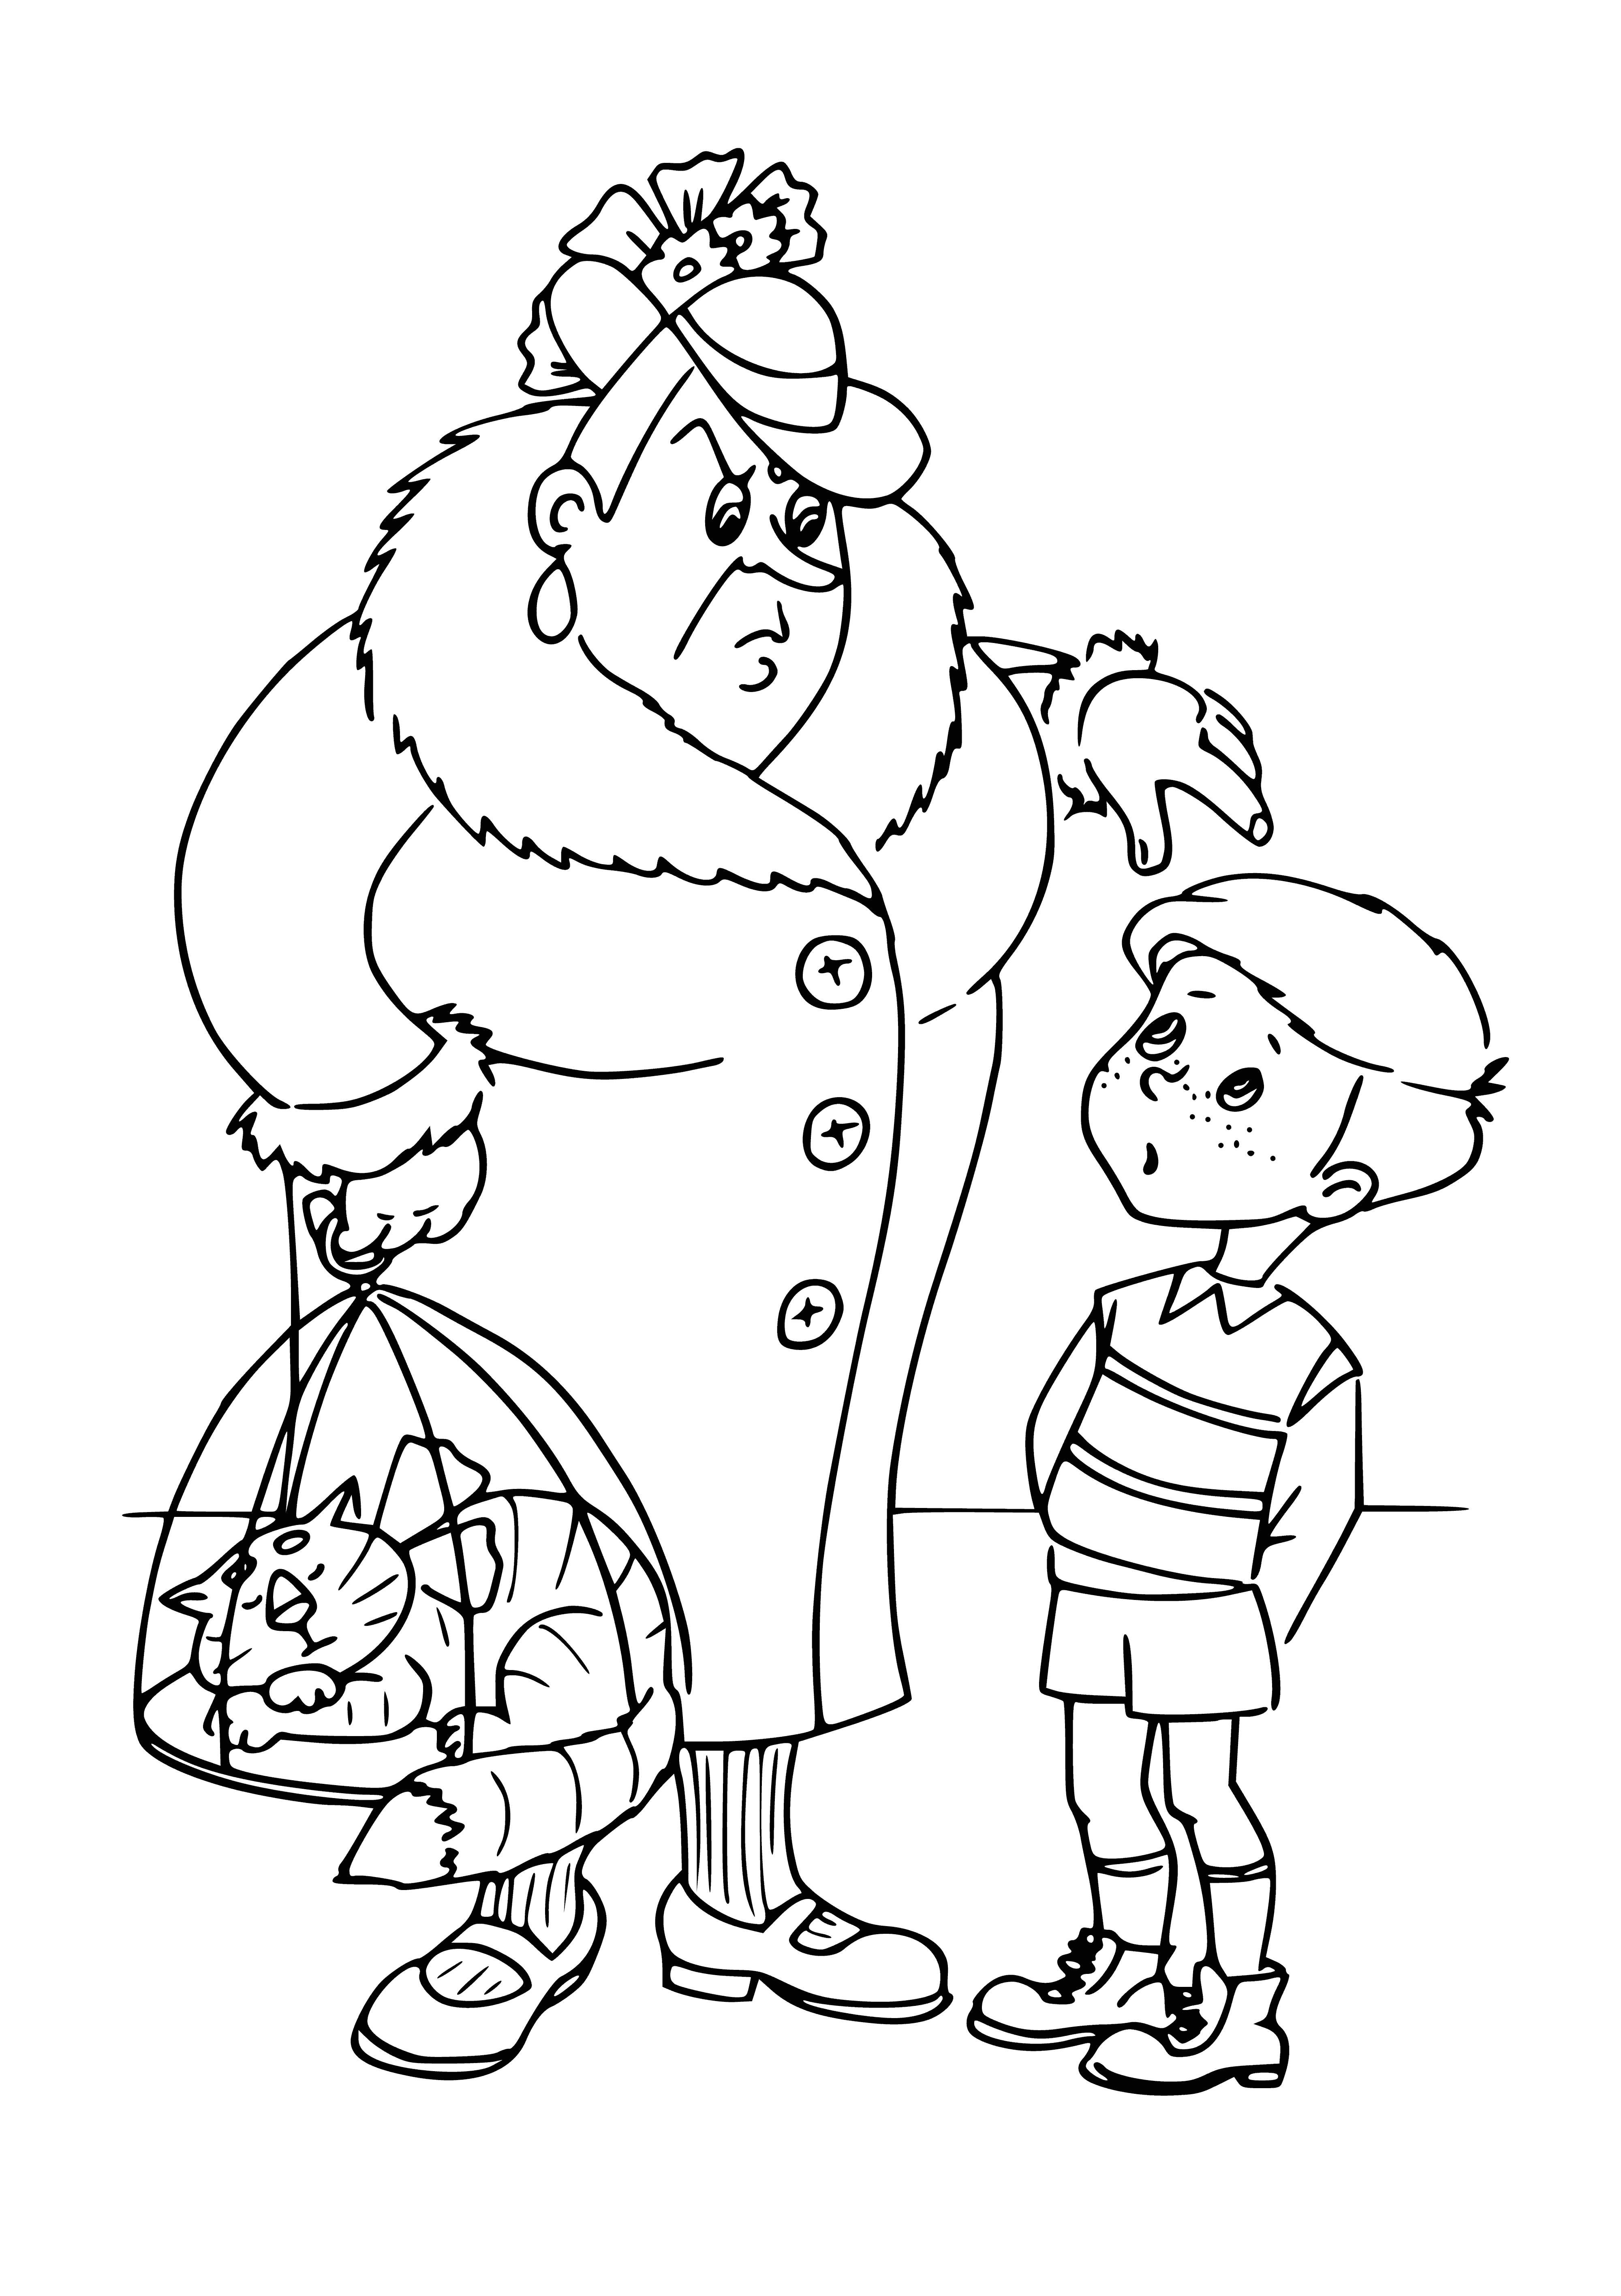 coloring page: Orange creature hugs a smaller, blue one. Both are smiling with large teeth. #friendship